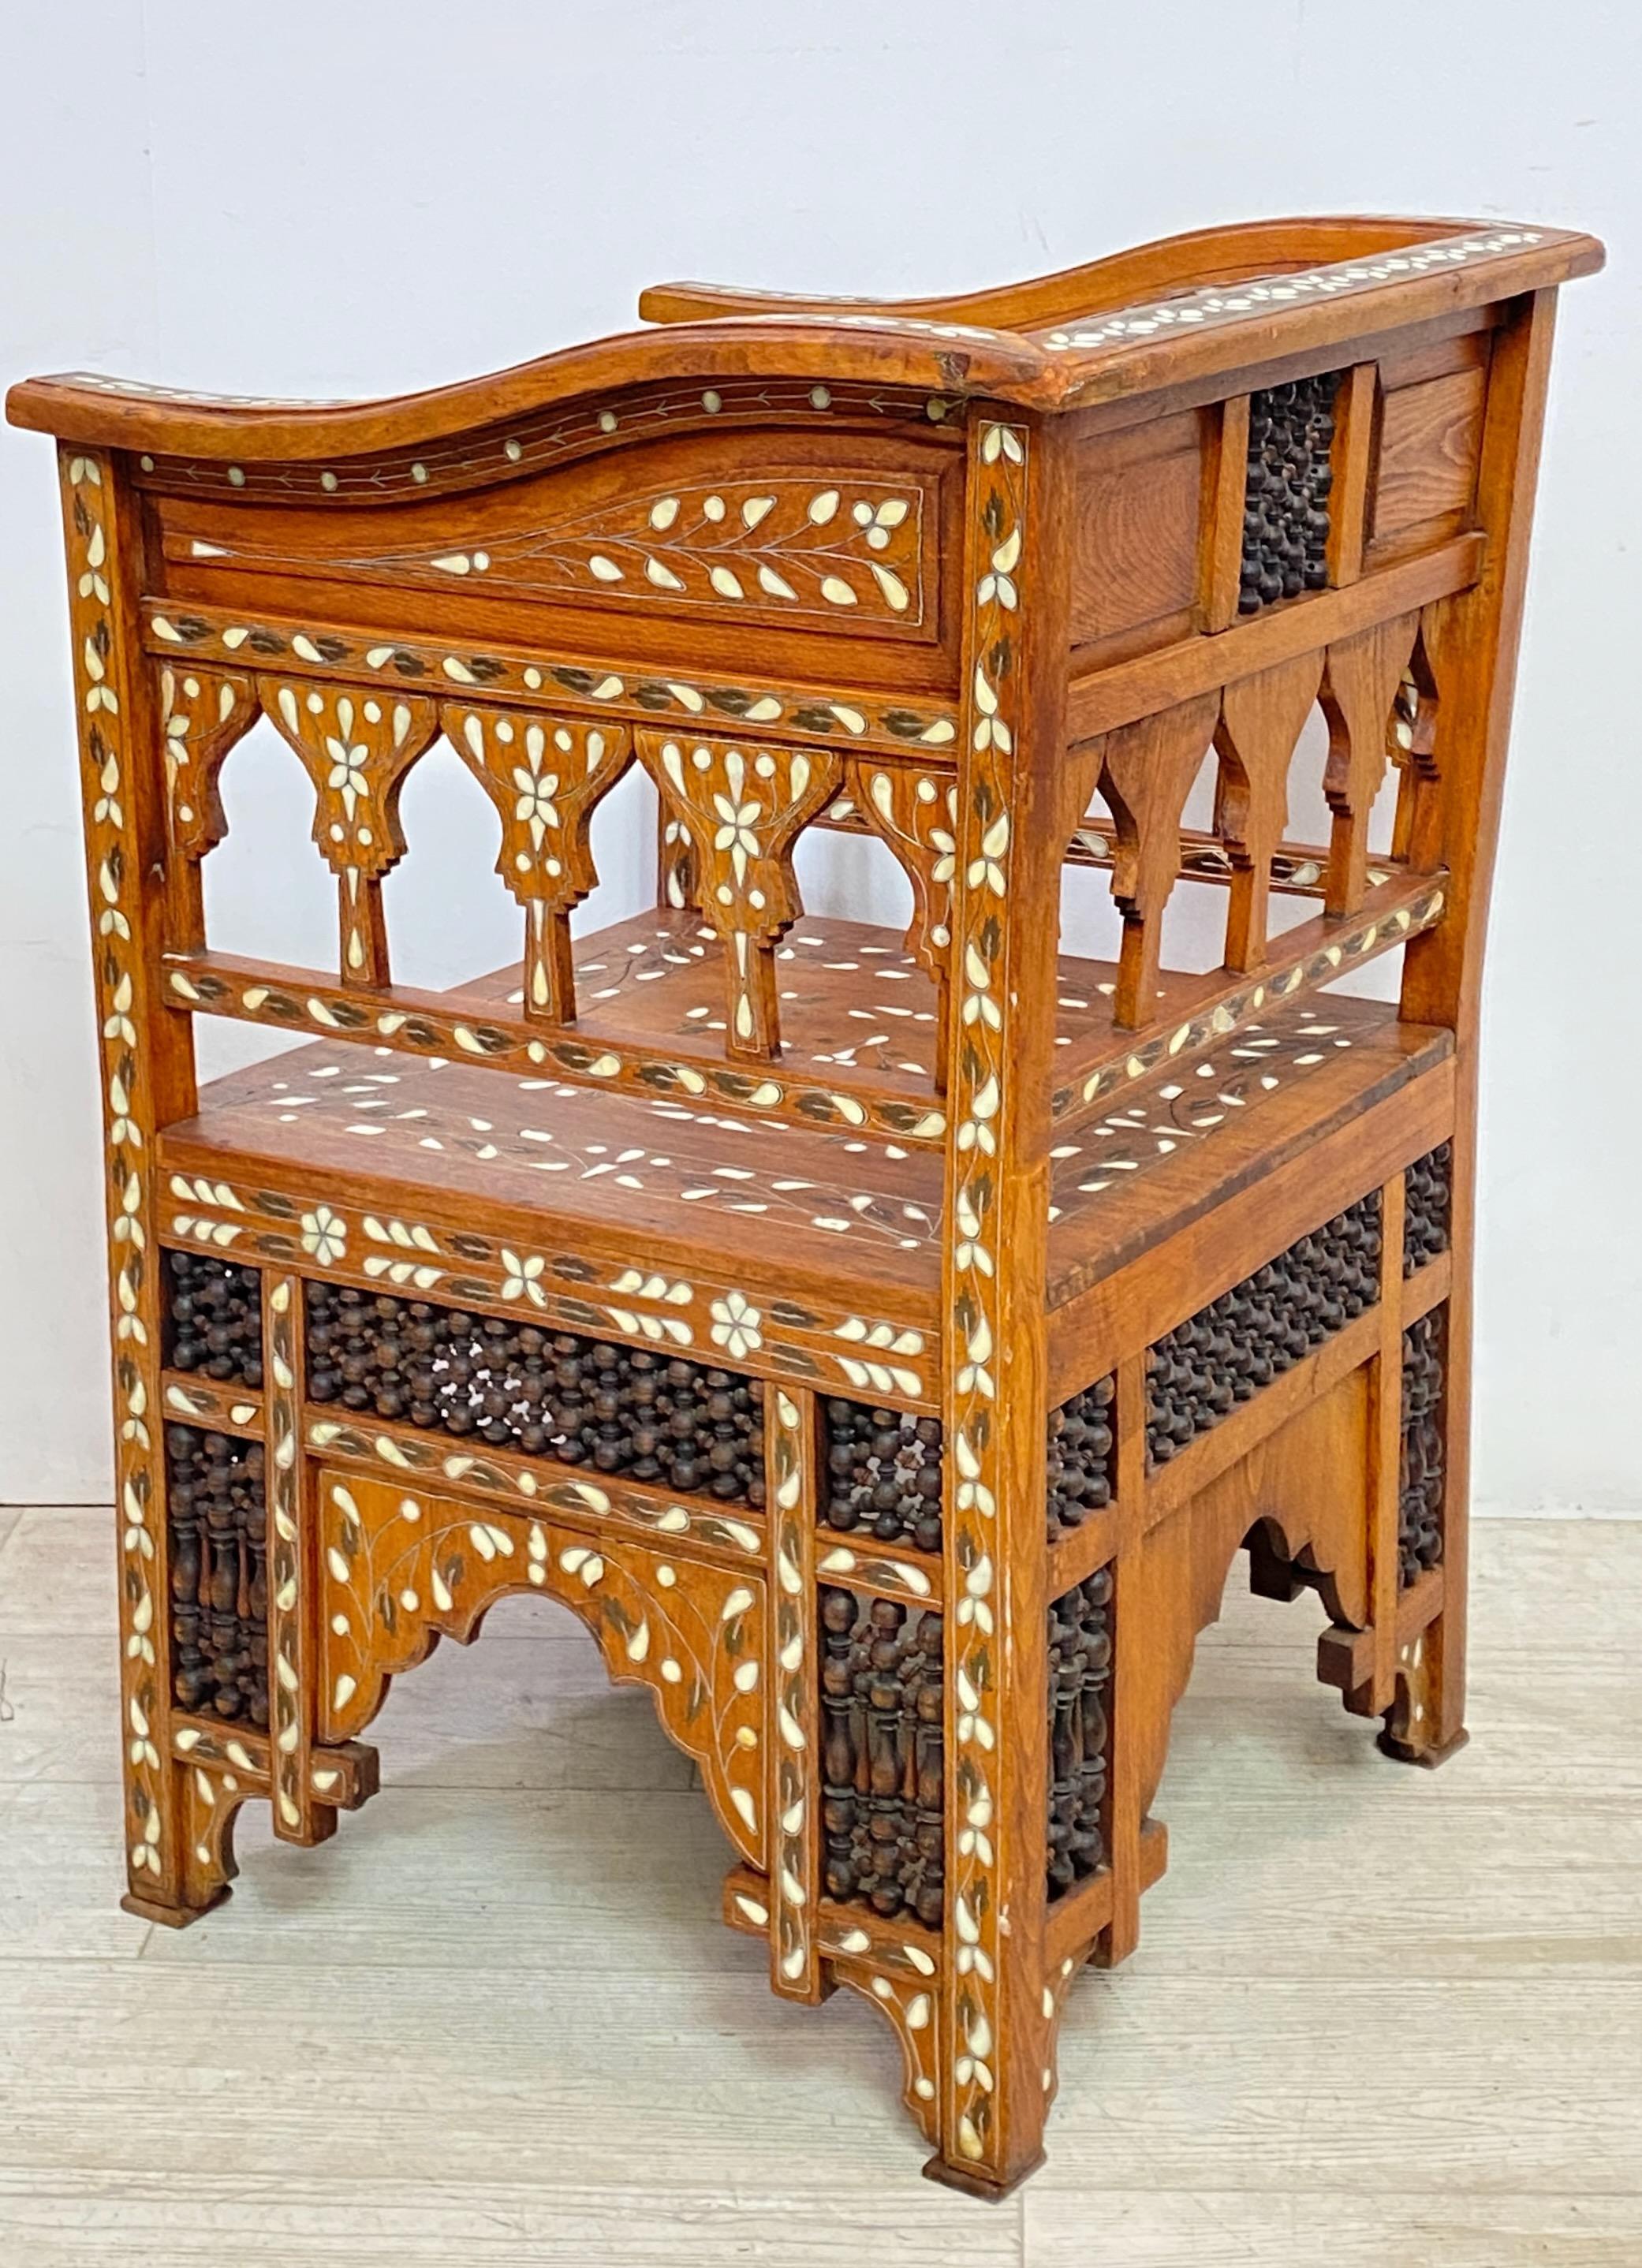 Syrian Walnut Chair with Mixed Inlay, Late 19th-Early 20th Century  For Sale 1